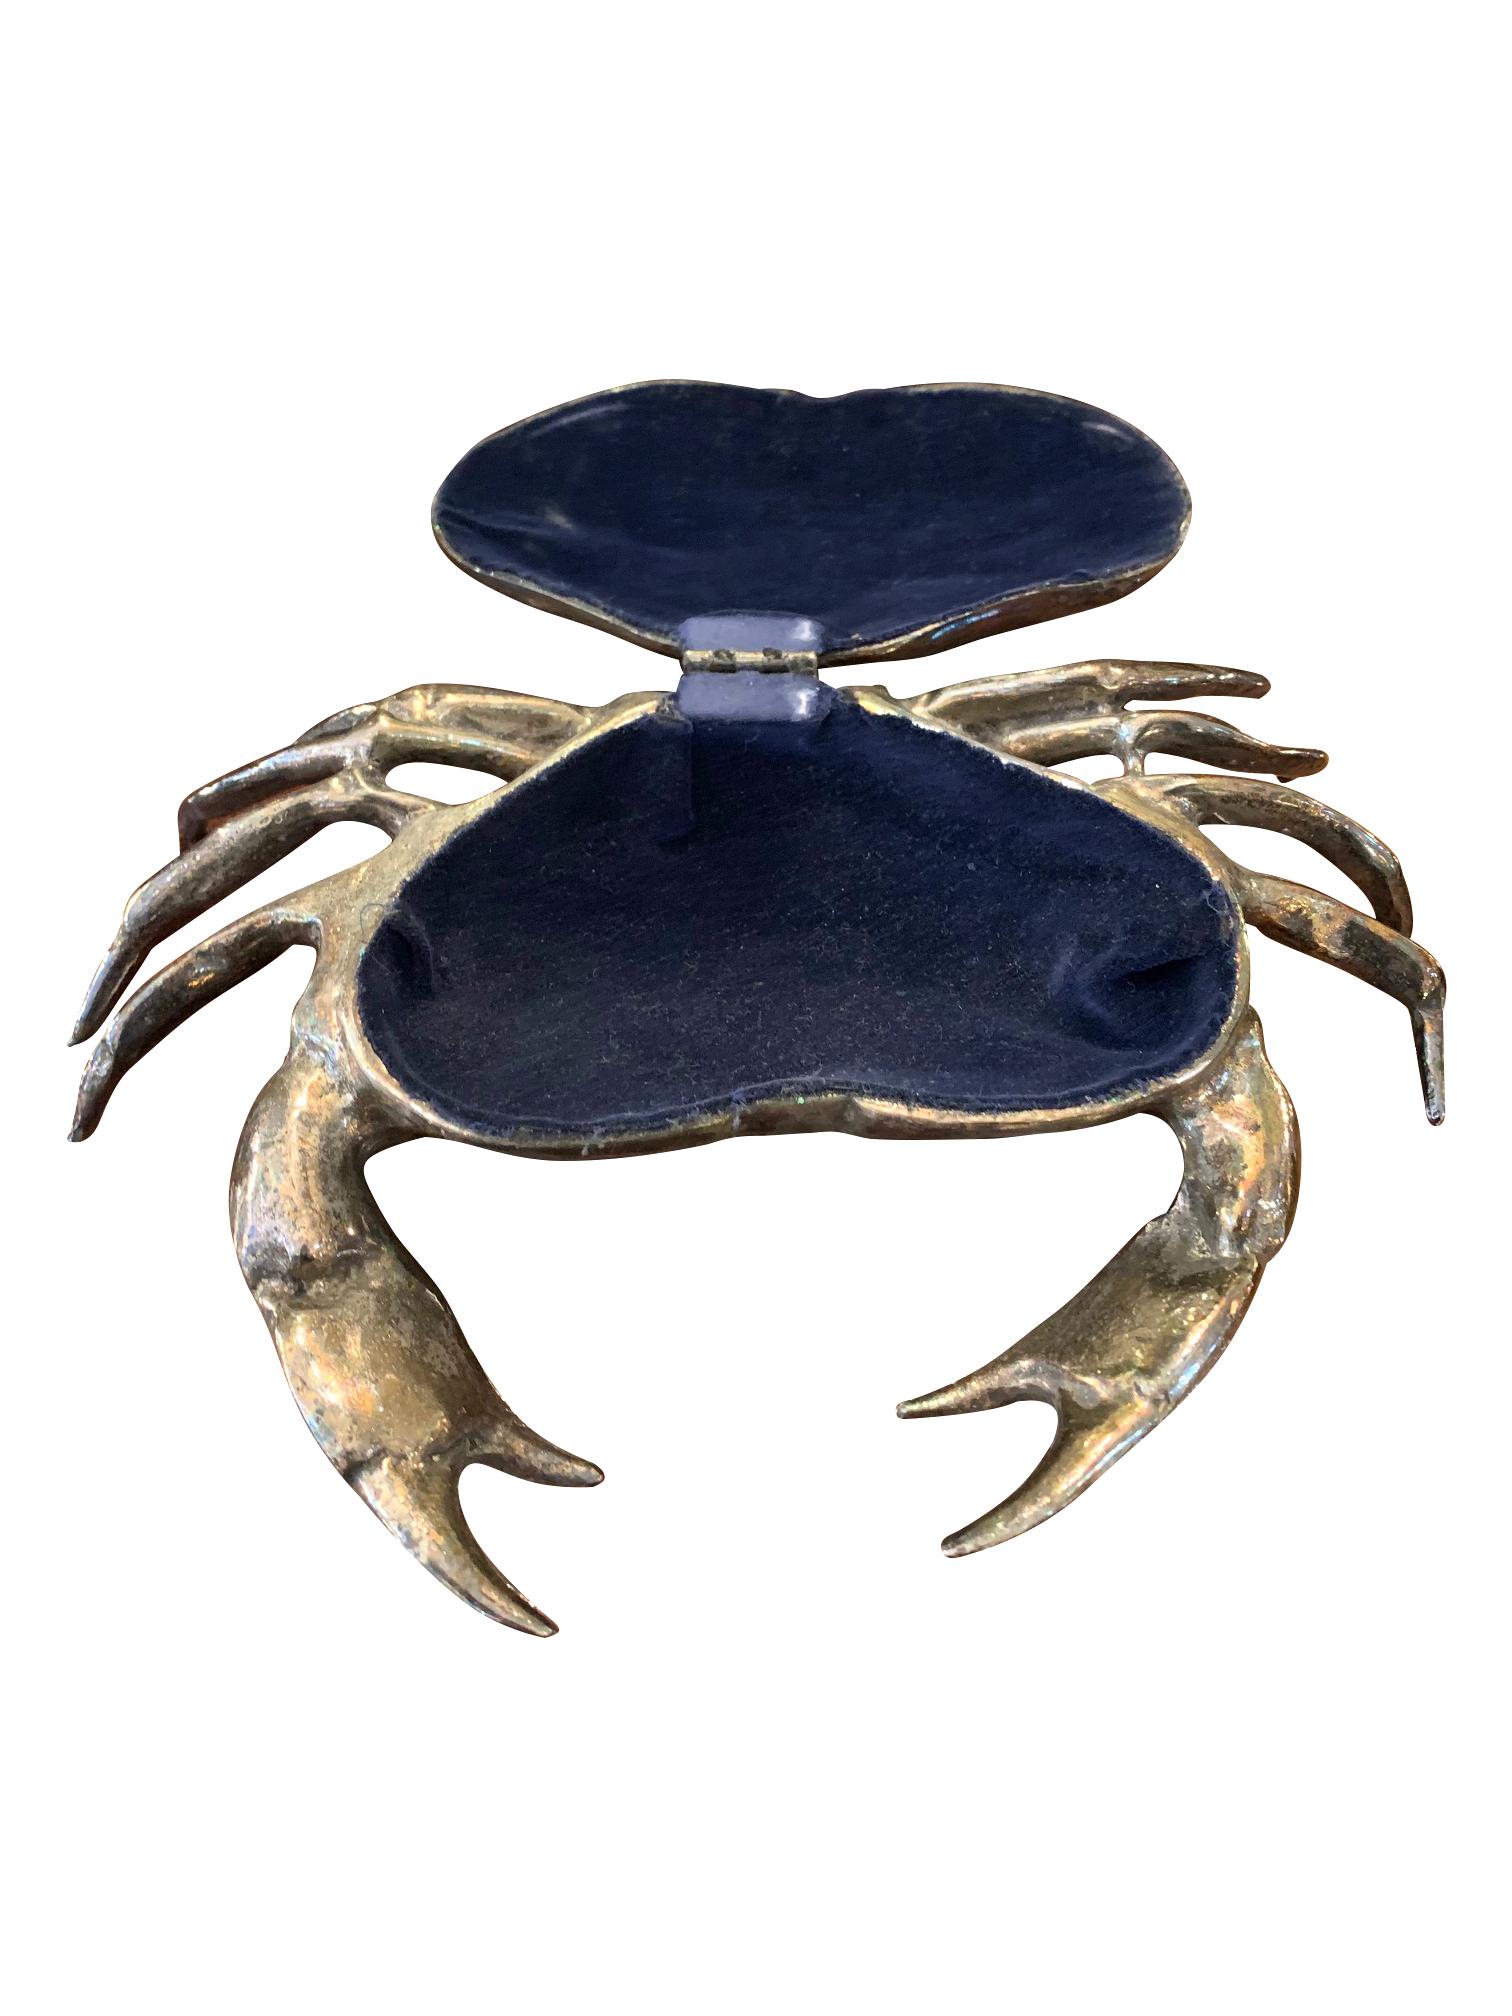 Mid-Century Modern Fondica Solid Cast Crab with Hinged Top Shell with Blue Velvet Lining